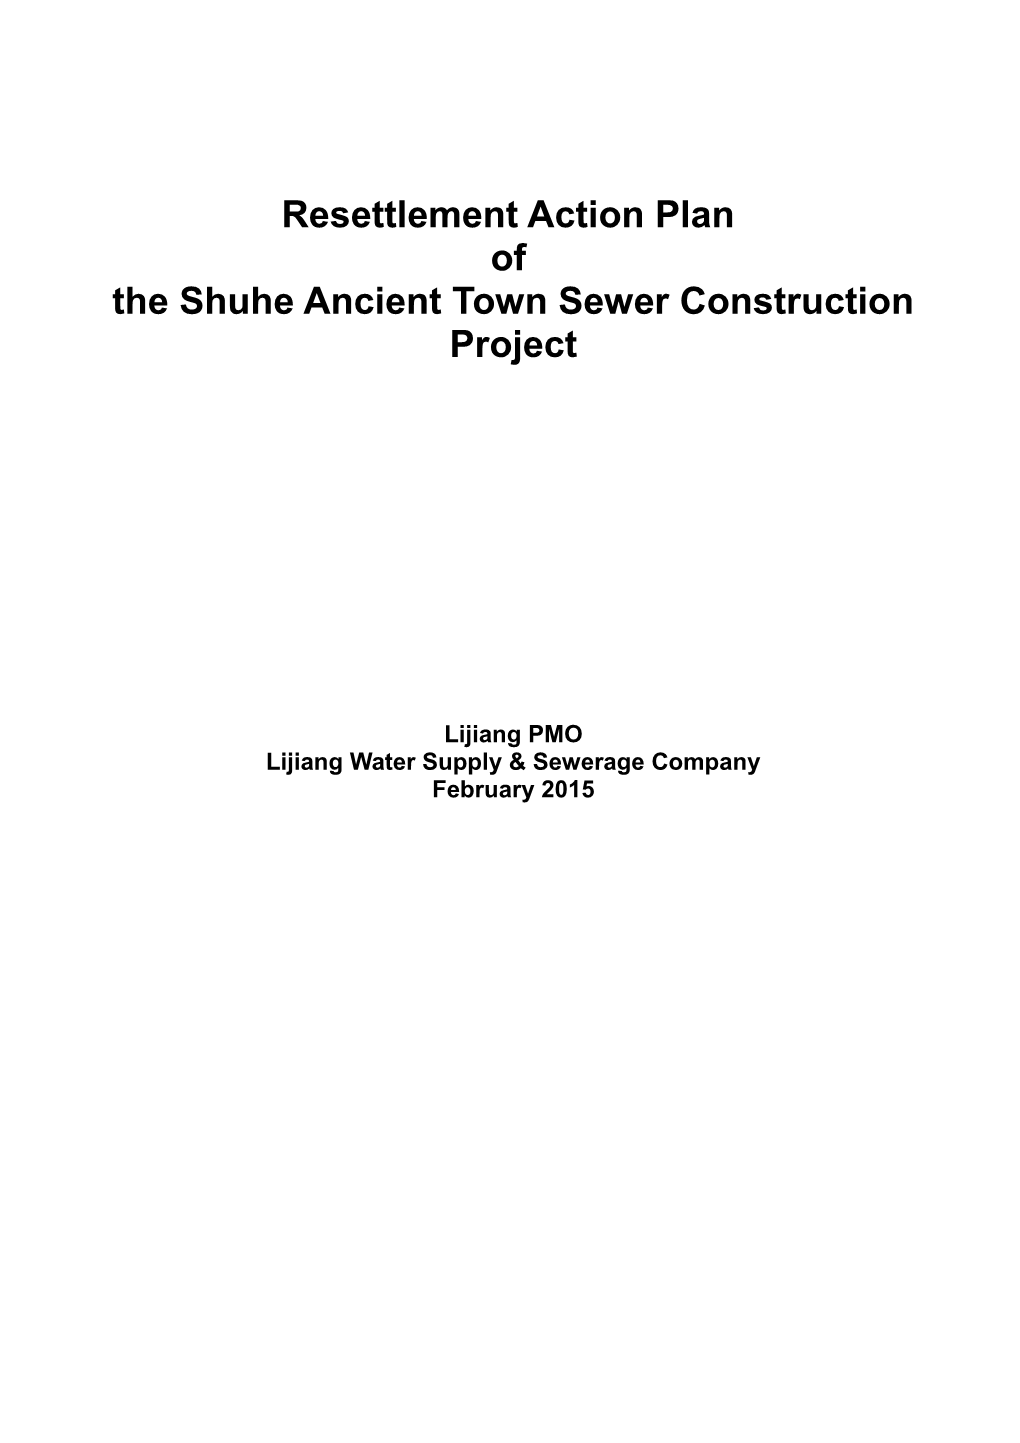 The Shuhe Ancient Town Sewer Construction Project